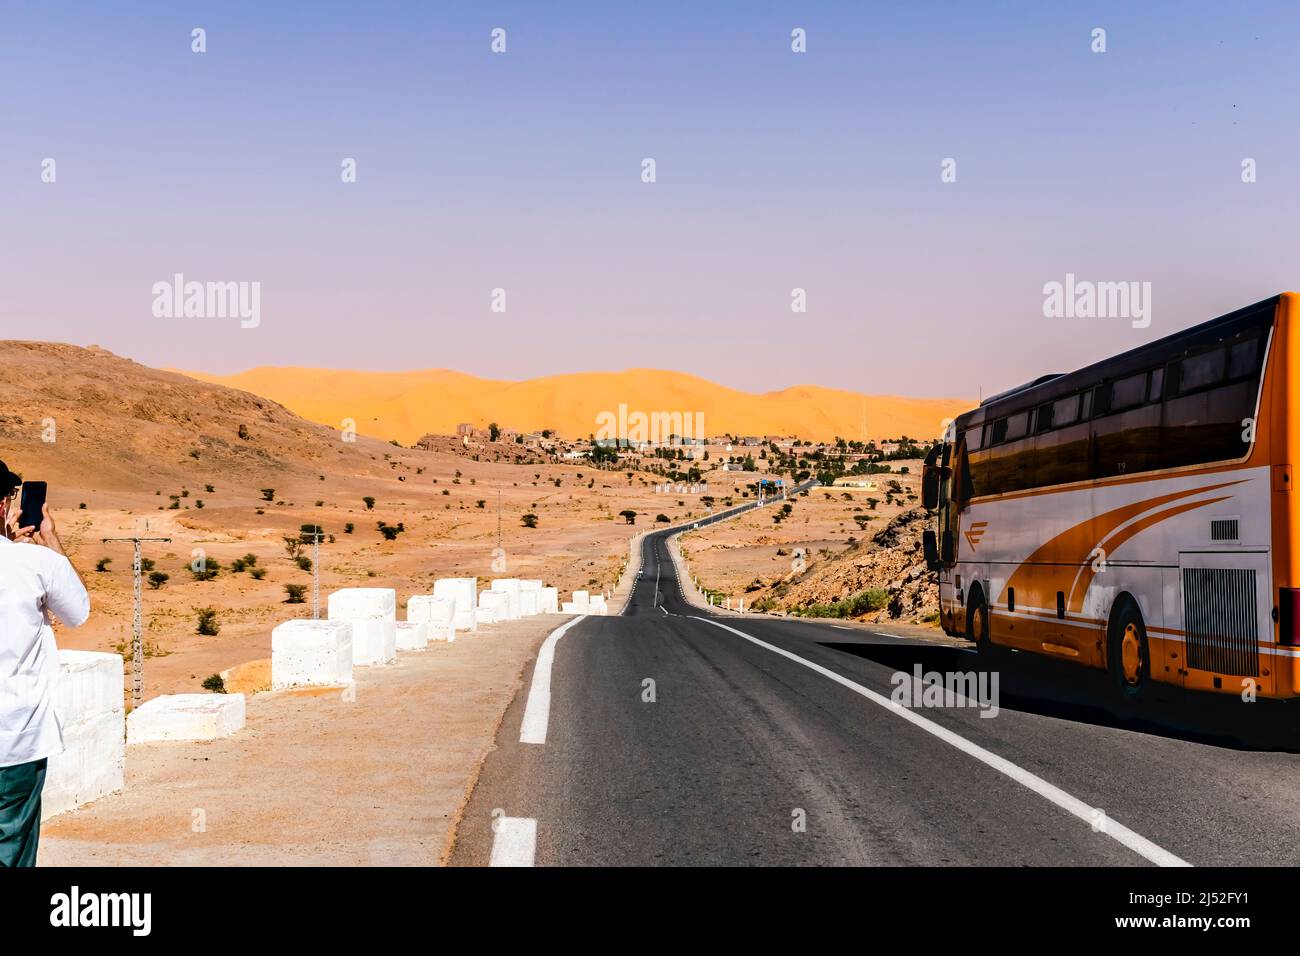 A bus parked and an unrecognizable tourist taking a photo with smartphone of the sand dune and the reg mountain, white concrete studs along the road. Stock Photo